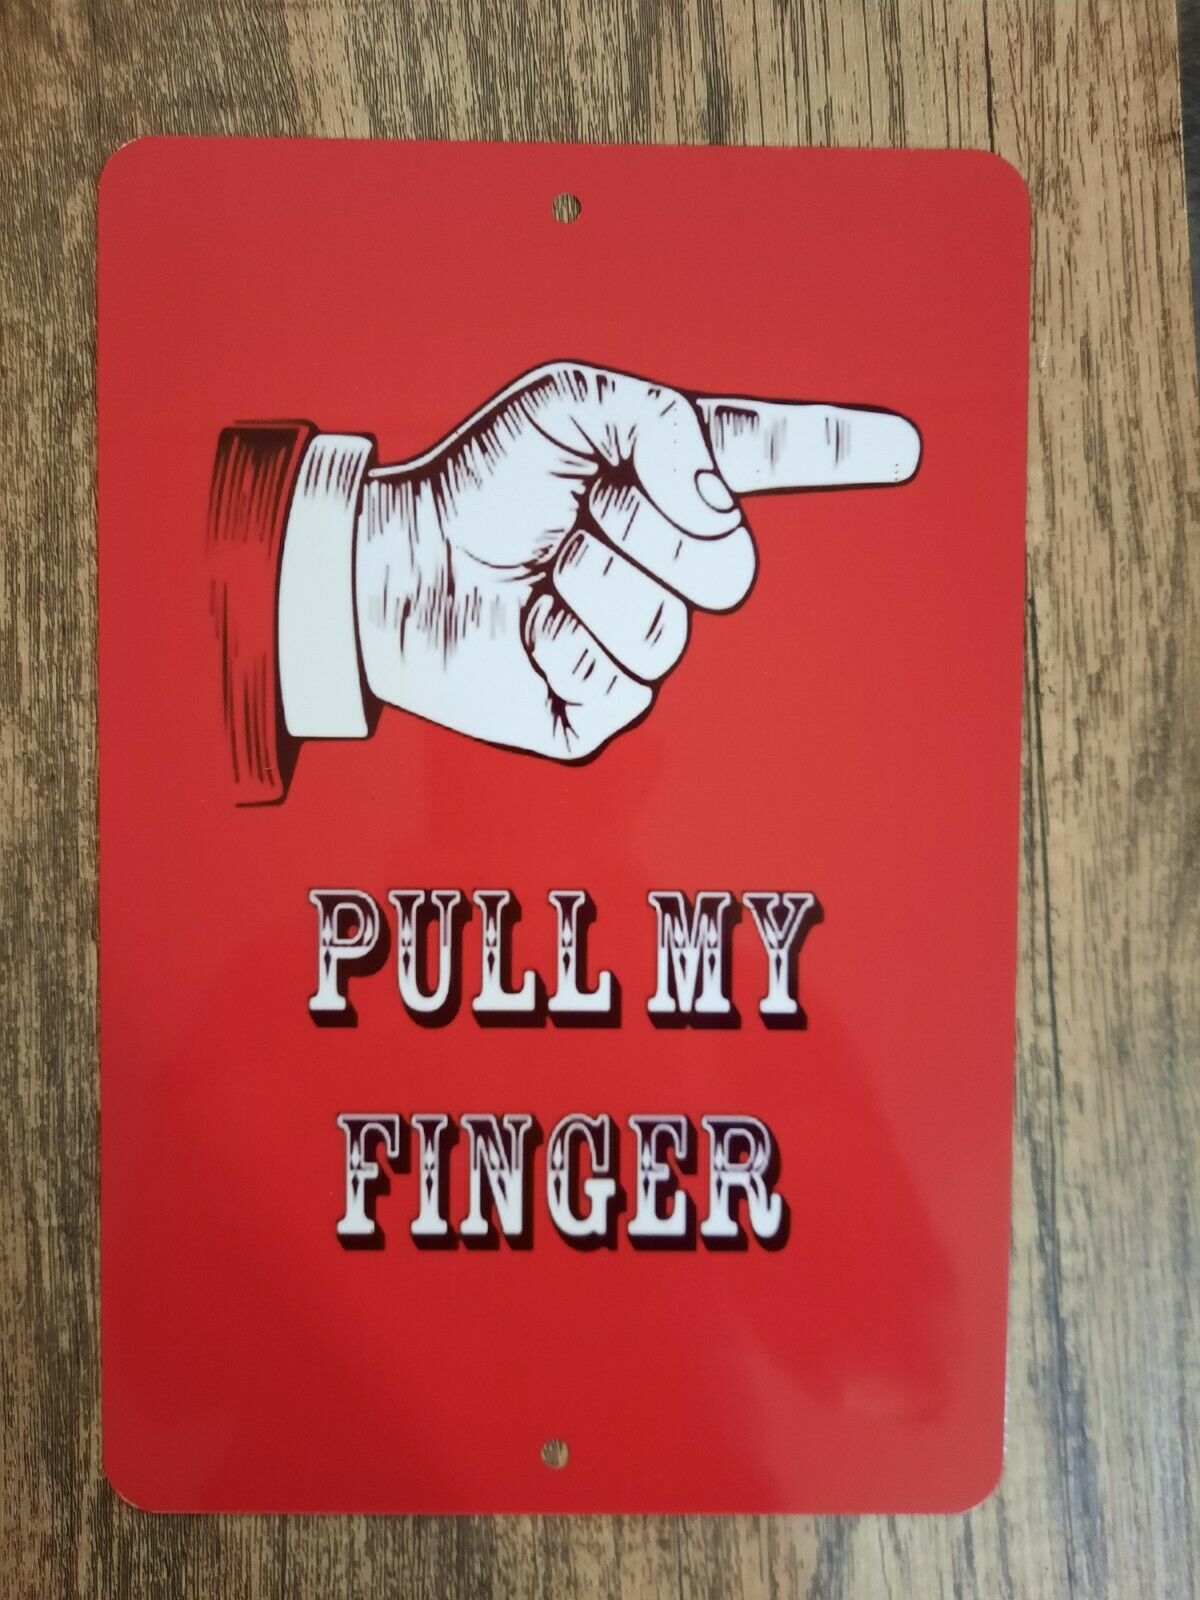 PULL MY FINGER 8x12 Metal Wall Sign Funny Misc Poster